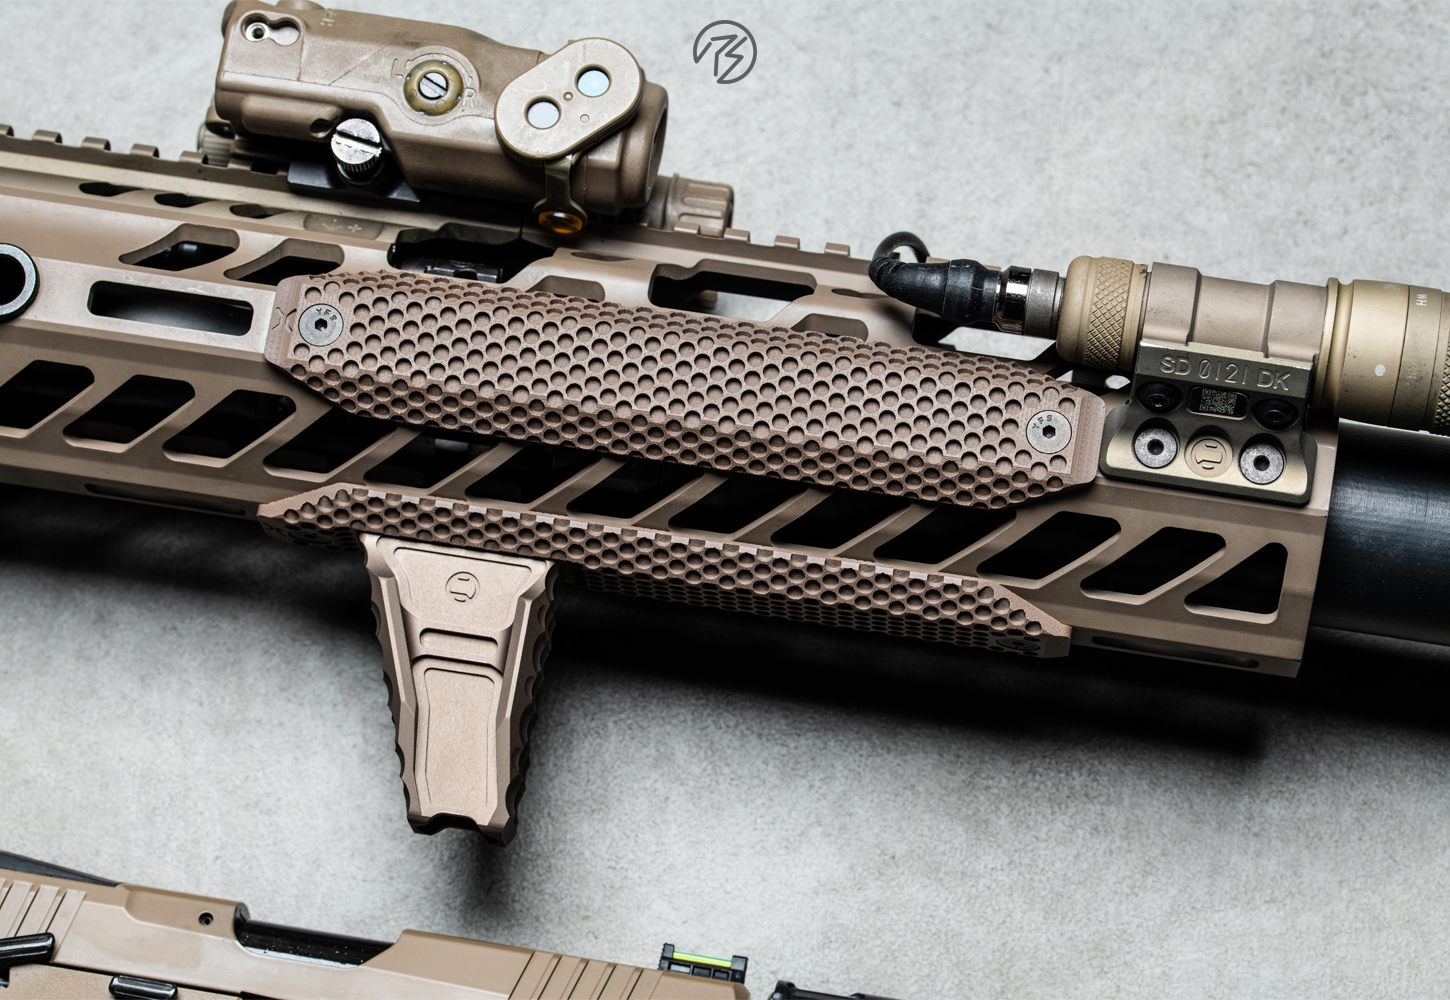 Top 6 Father's Day Gifts for the Gun Enthusiast - RailScales LLC